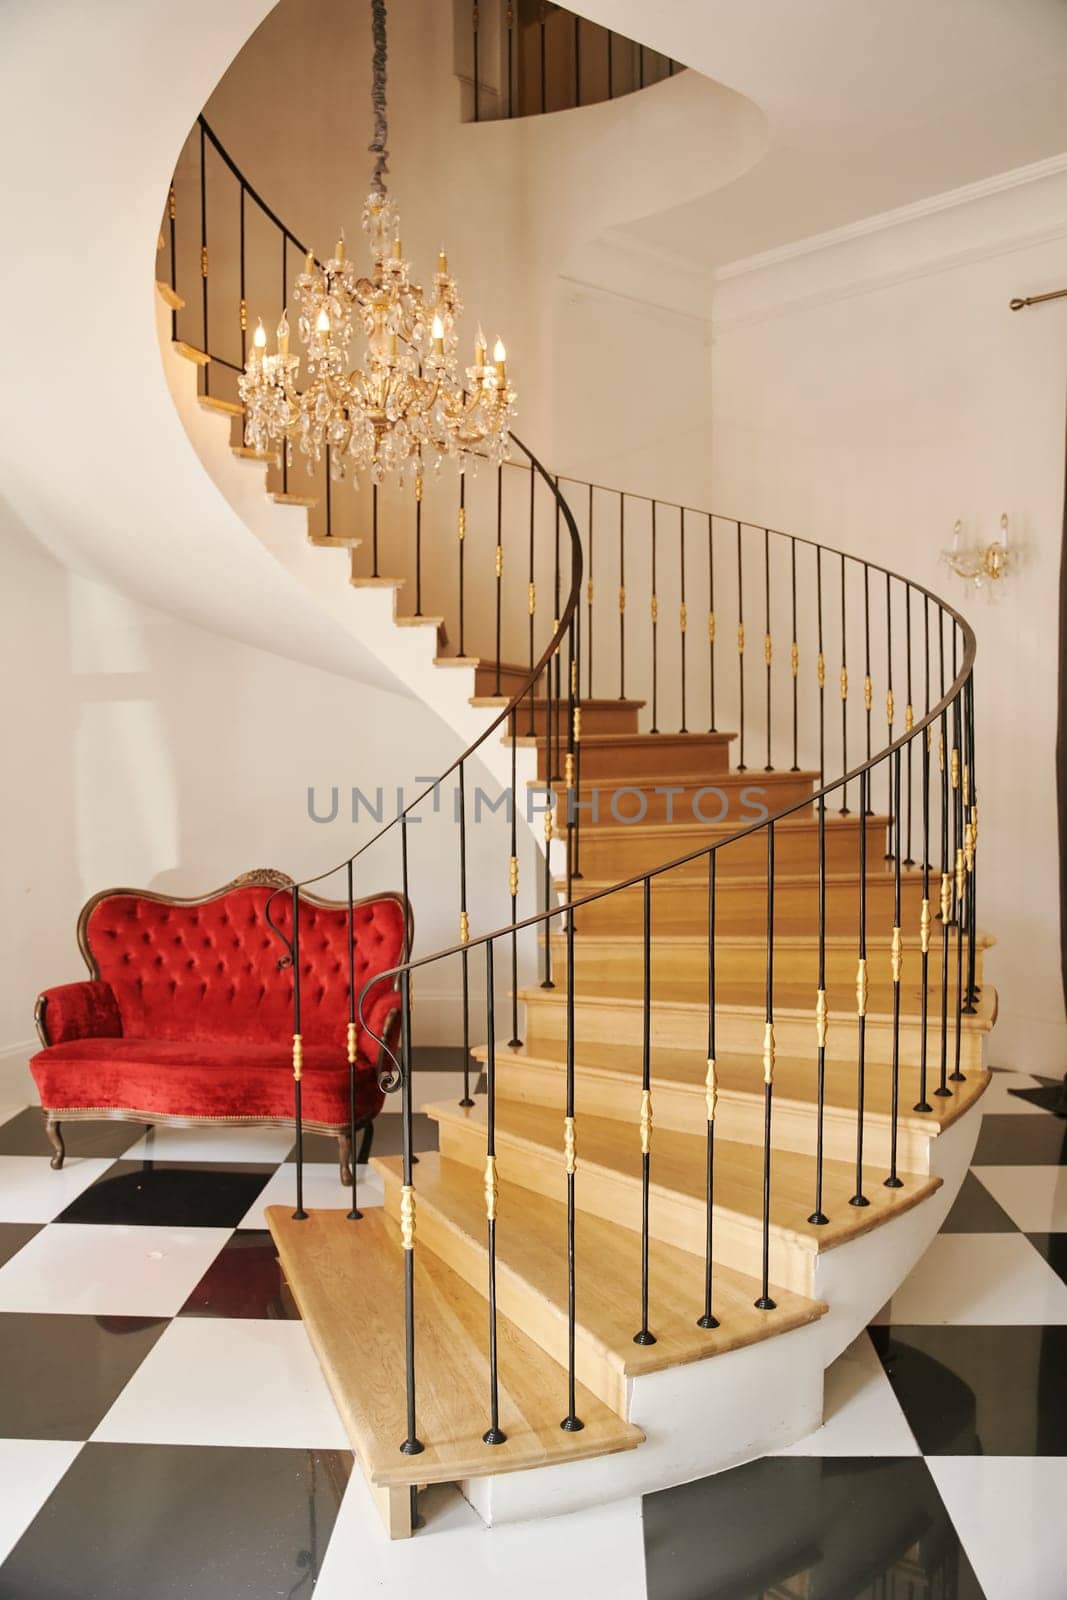 Hall with spiral staircase, glass chandelier and red sofa downstairs. High quality photo